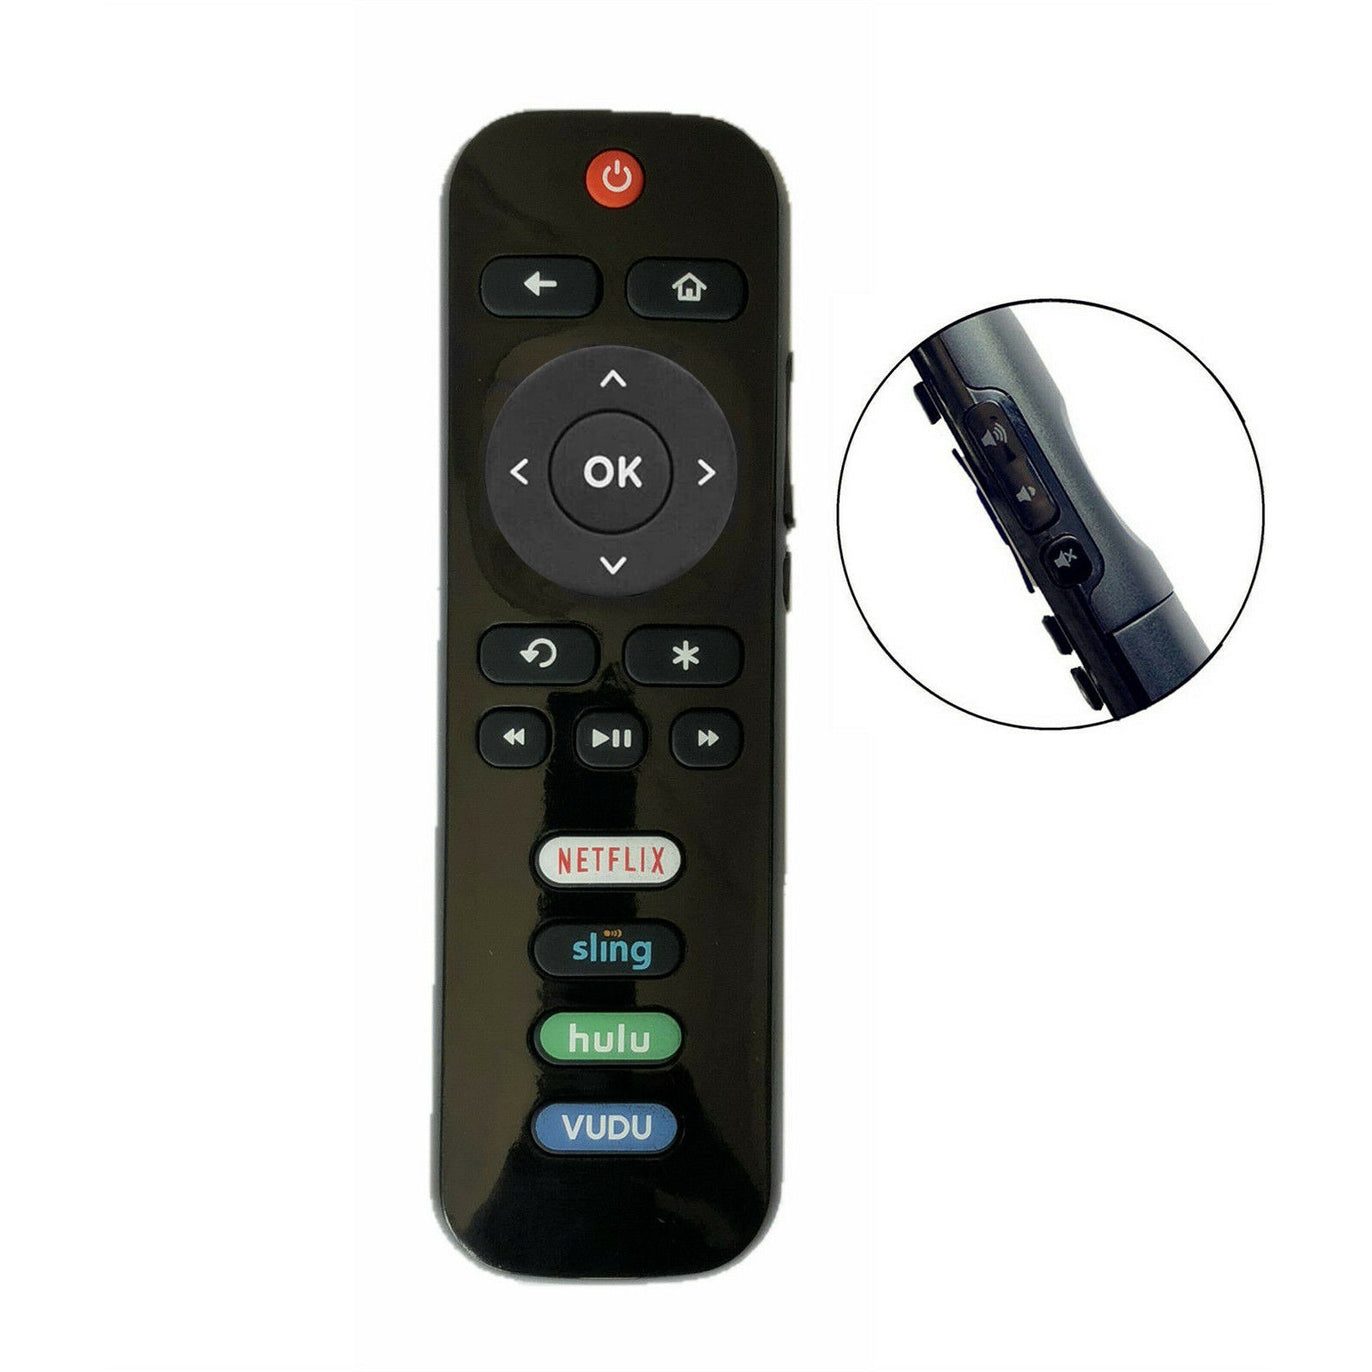 RC280 Replacement Remote Control for Roku TCL TV with Netflix Sling Hulu Vudu Keys